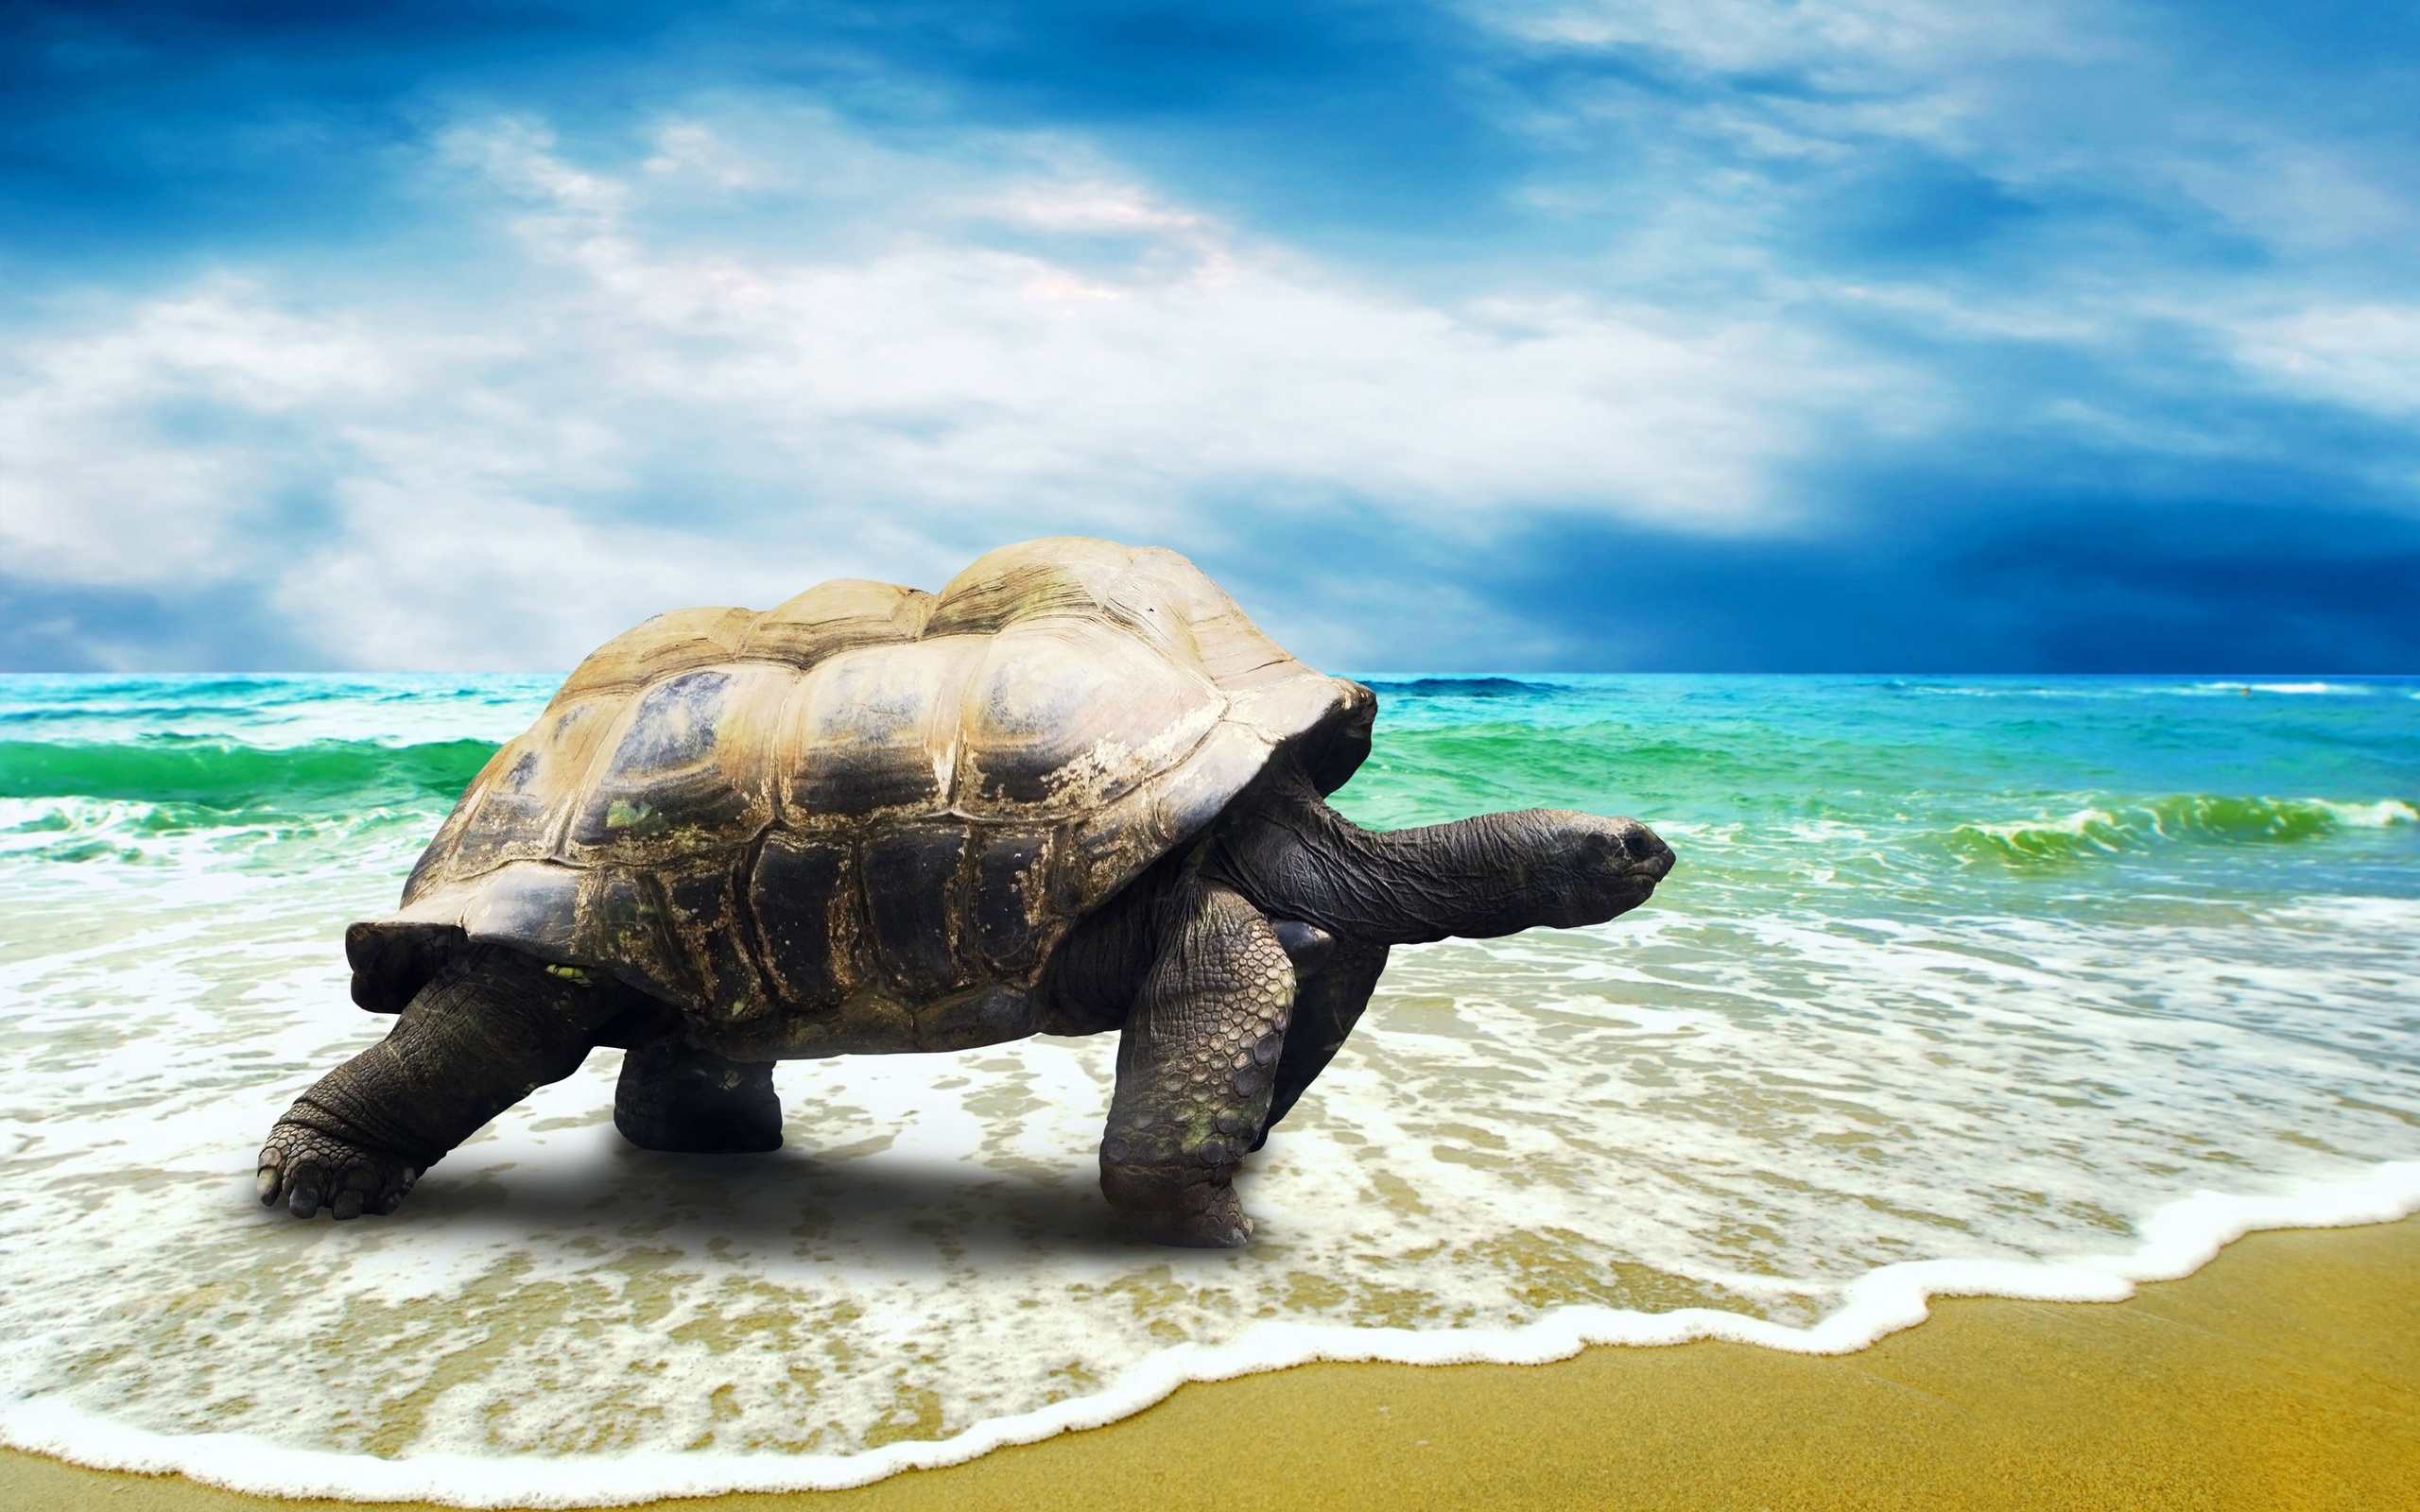 Download free 3D Over Turtle IPhone Wallpaper Mobile Wallpaper contributed  by schaer, 3D Over Turtle IPhone Wallpaper M… | Surreal art, Illustration  art, Surrealism